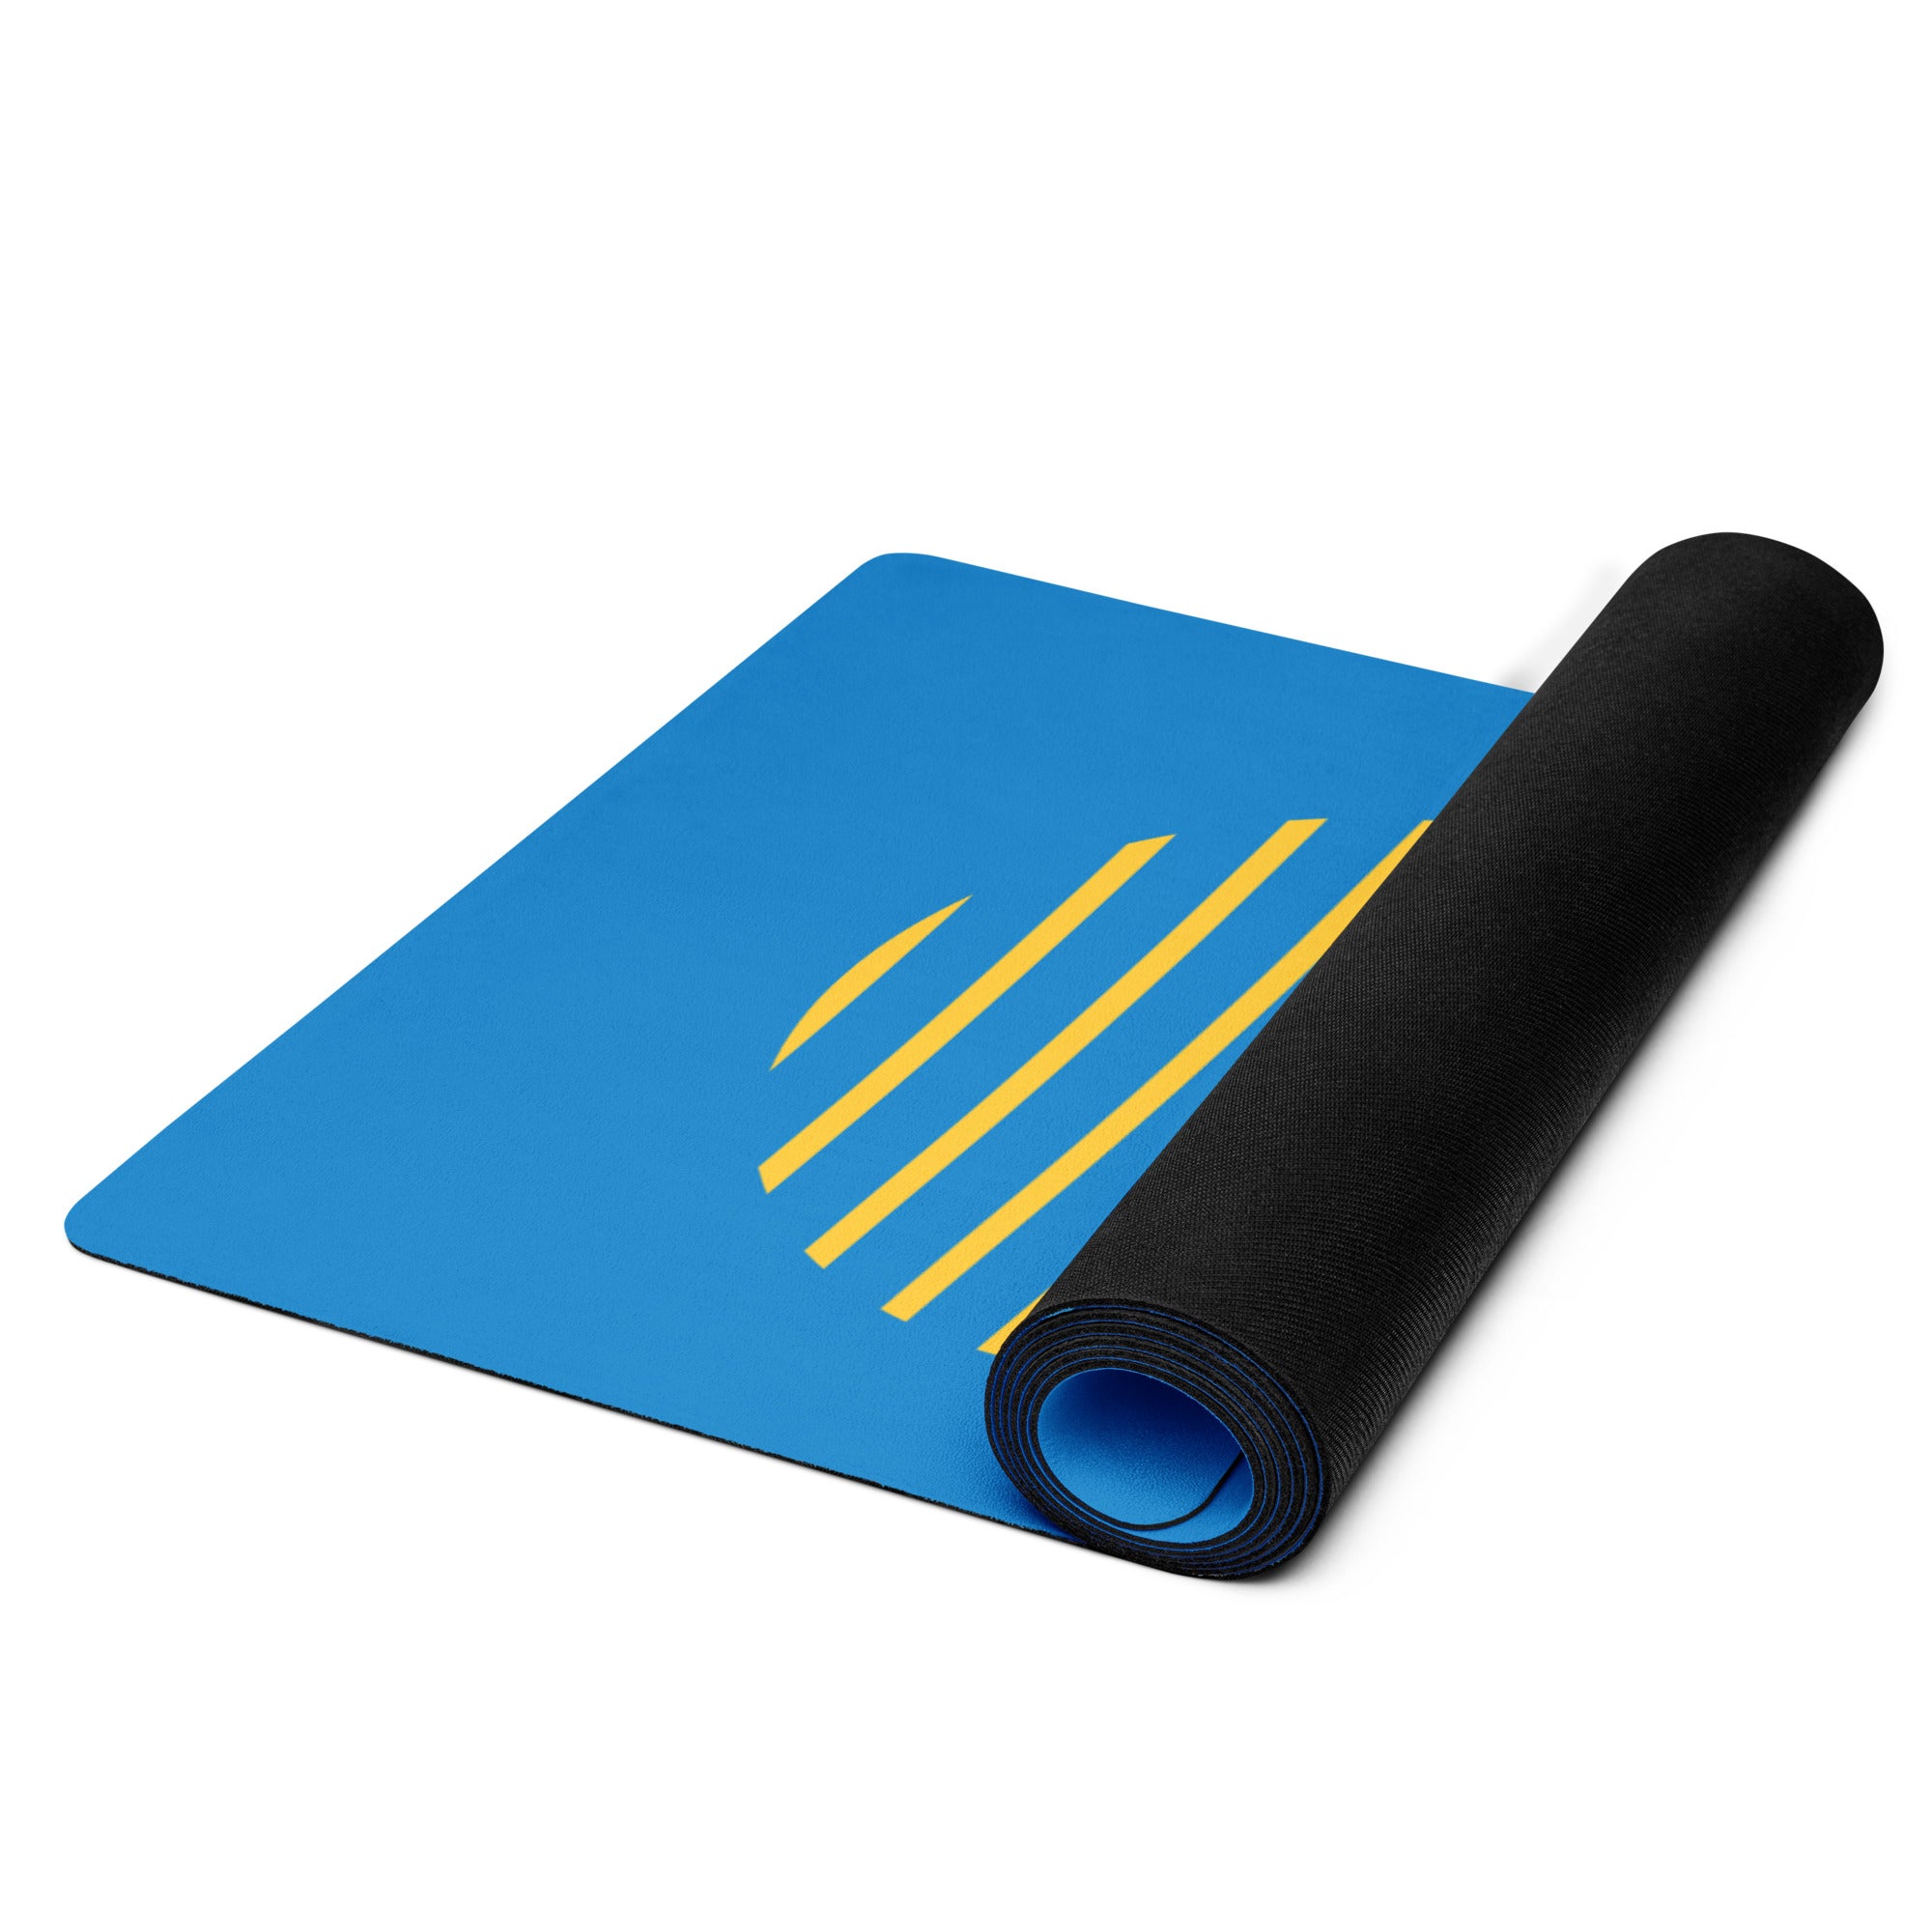 Serenity Exercise Mat